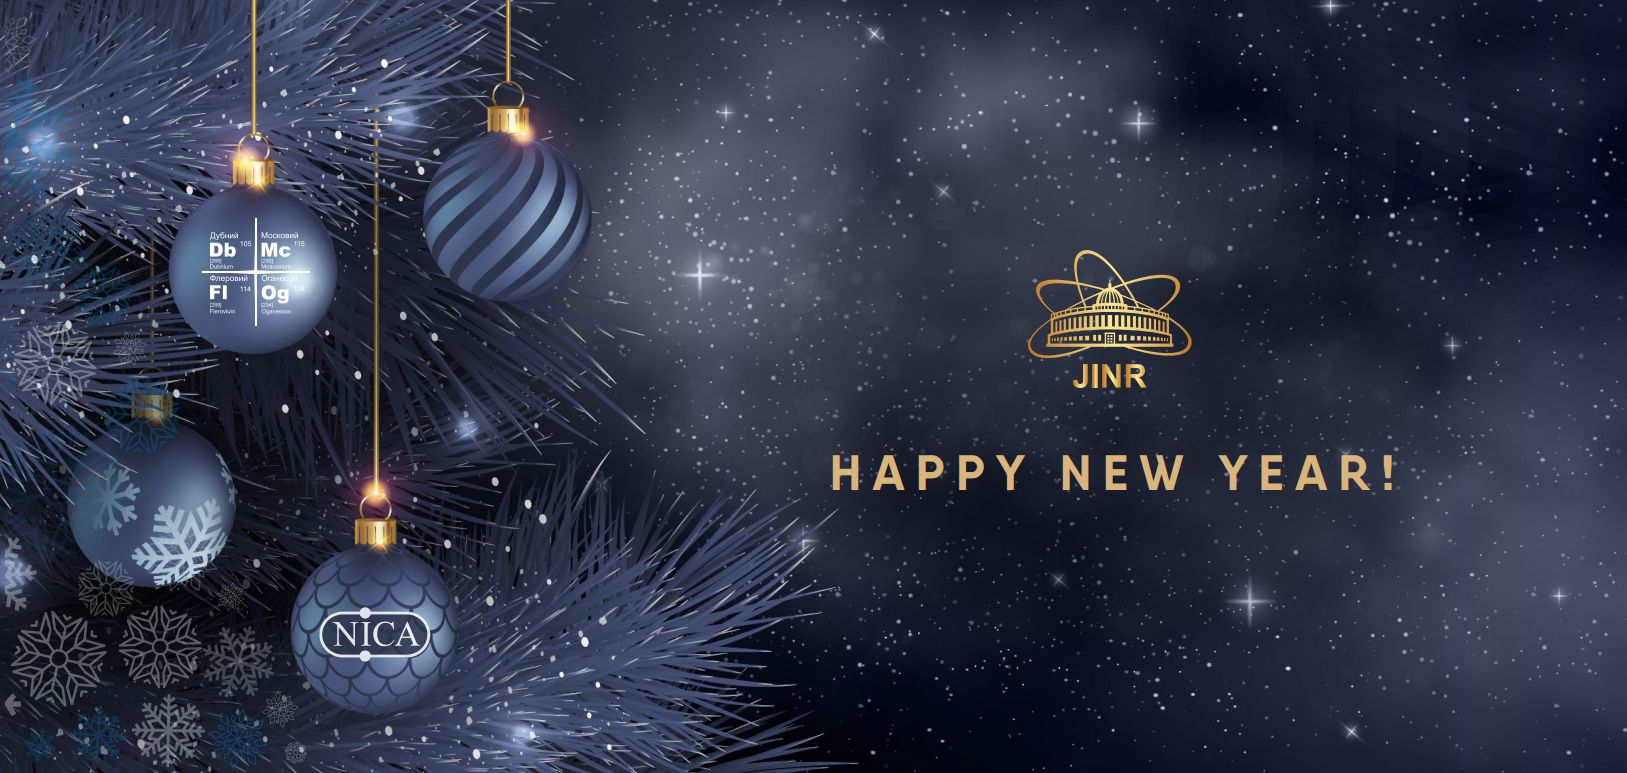 New Year greetings from JINR Director Academician V.A.Matveev ...